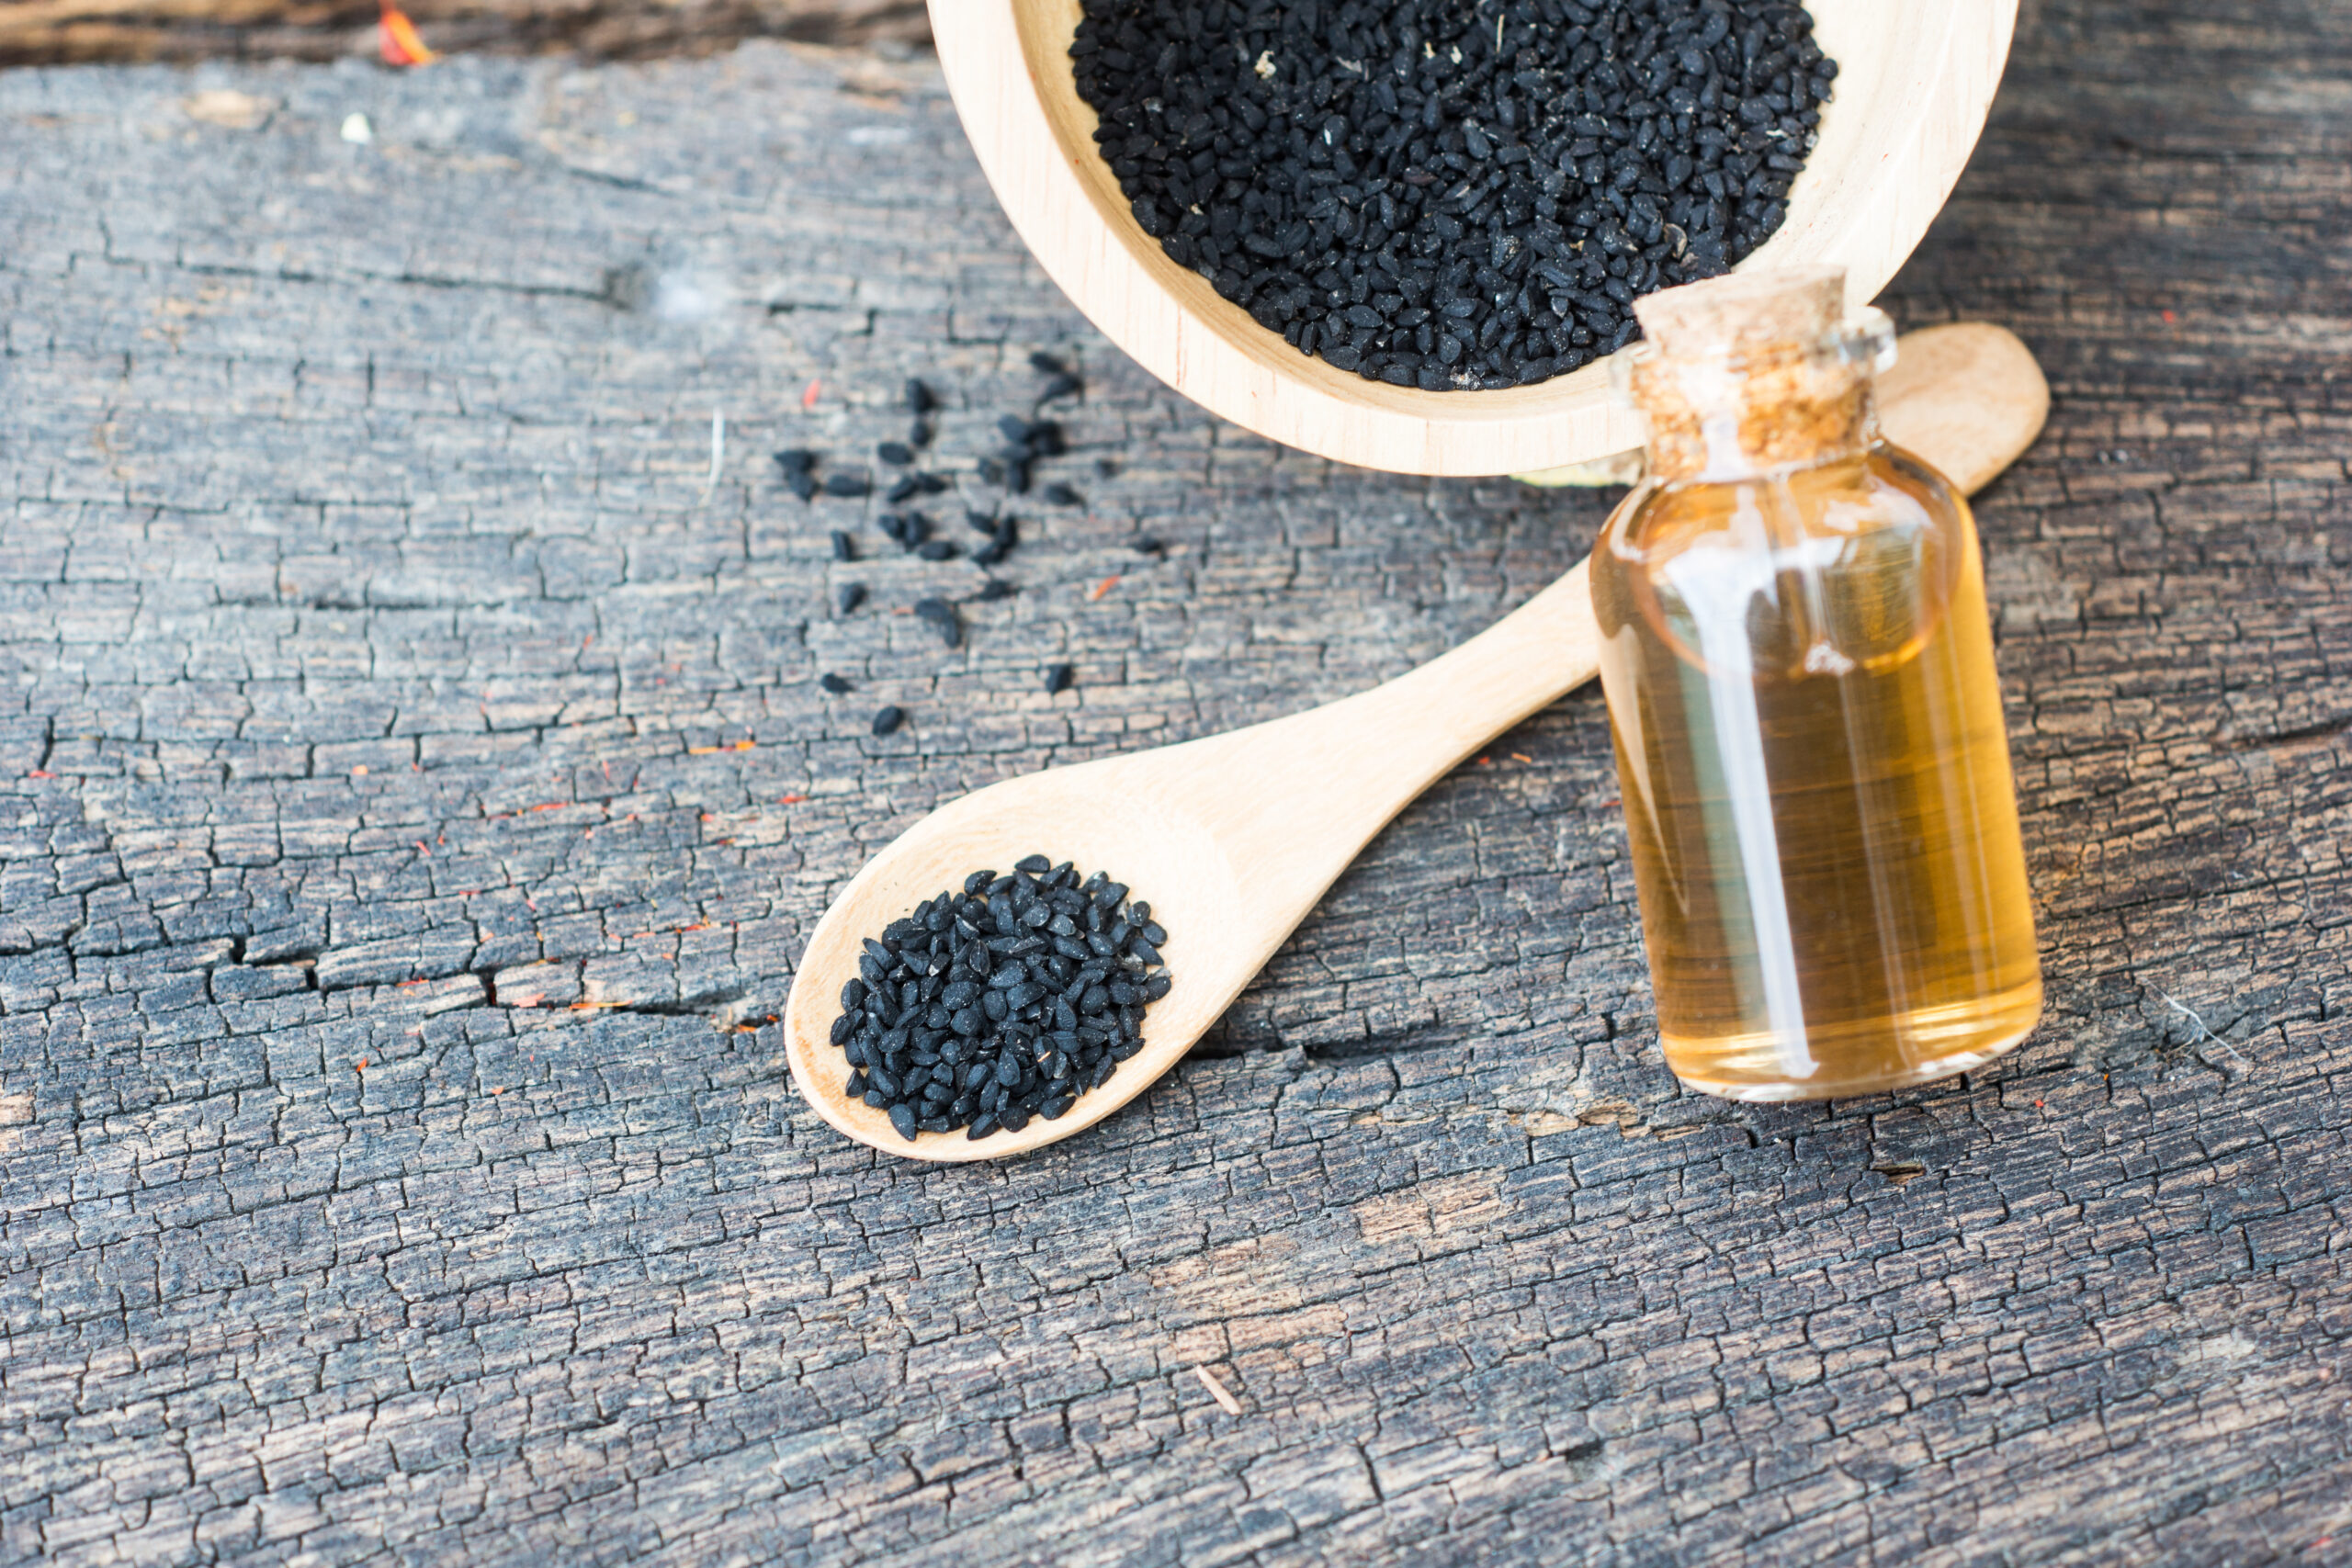 Join us today as we take a look at one of the most beneficial health supplements that Arabs have known – the benefits of black seed oil.